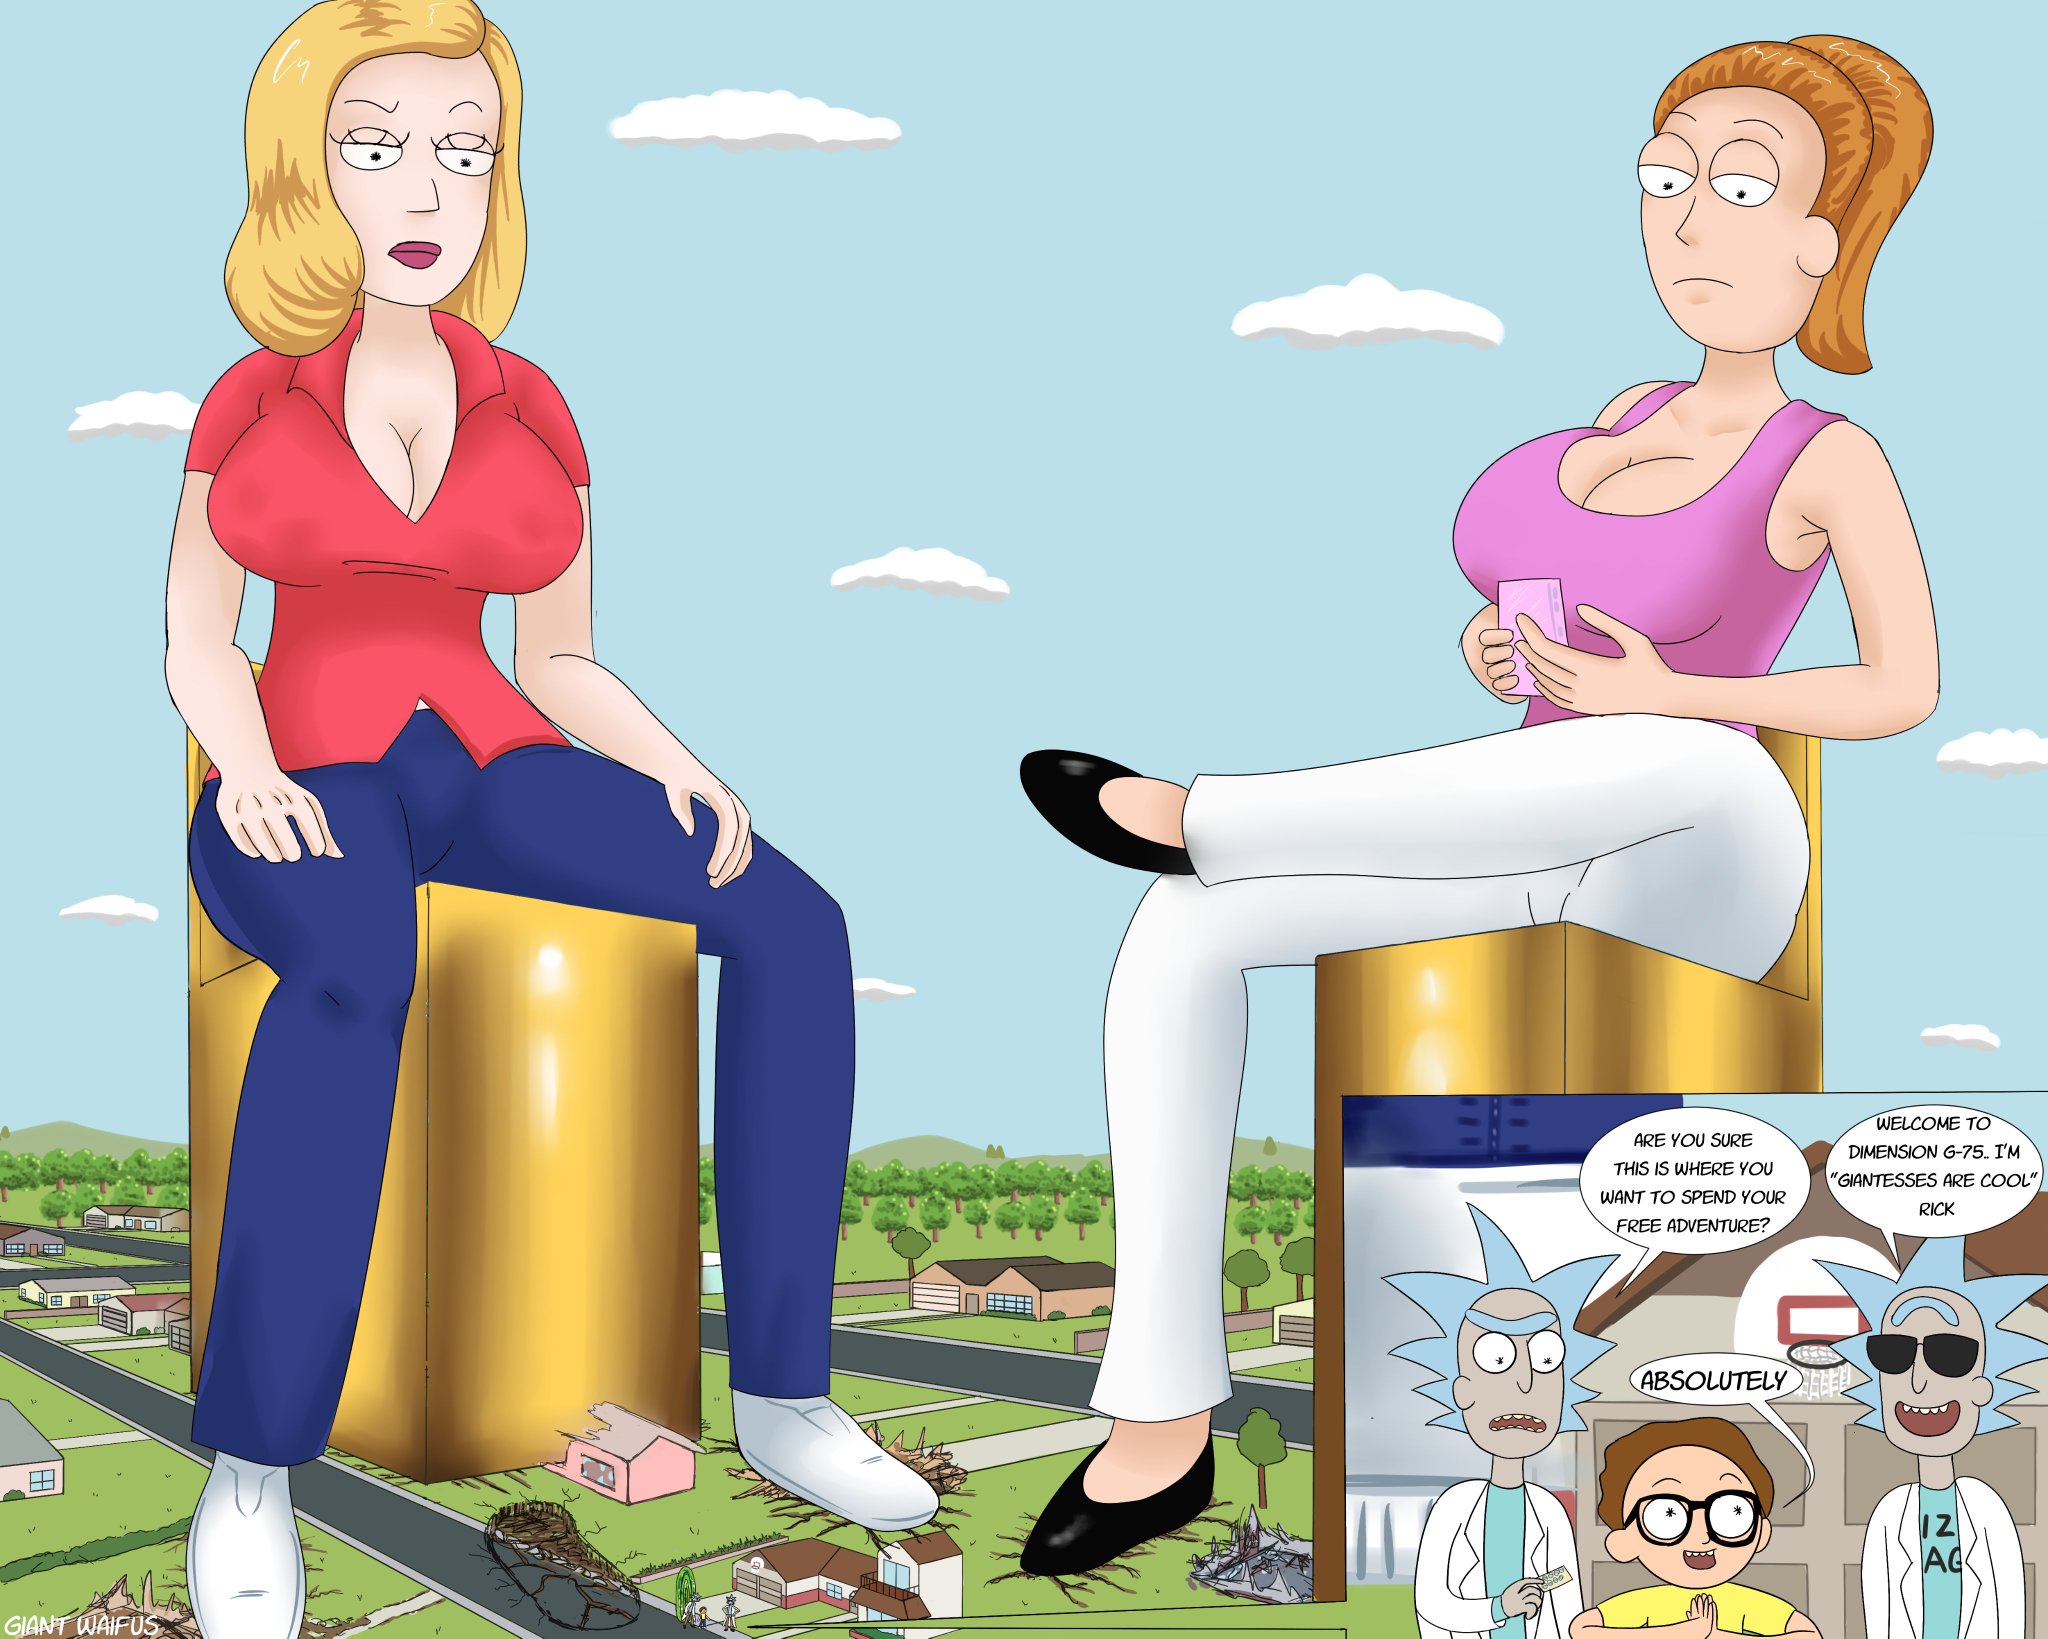 “A certain Morty uses his one free adventure to go to this #giantess dimens...